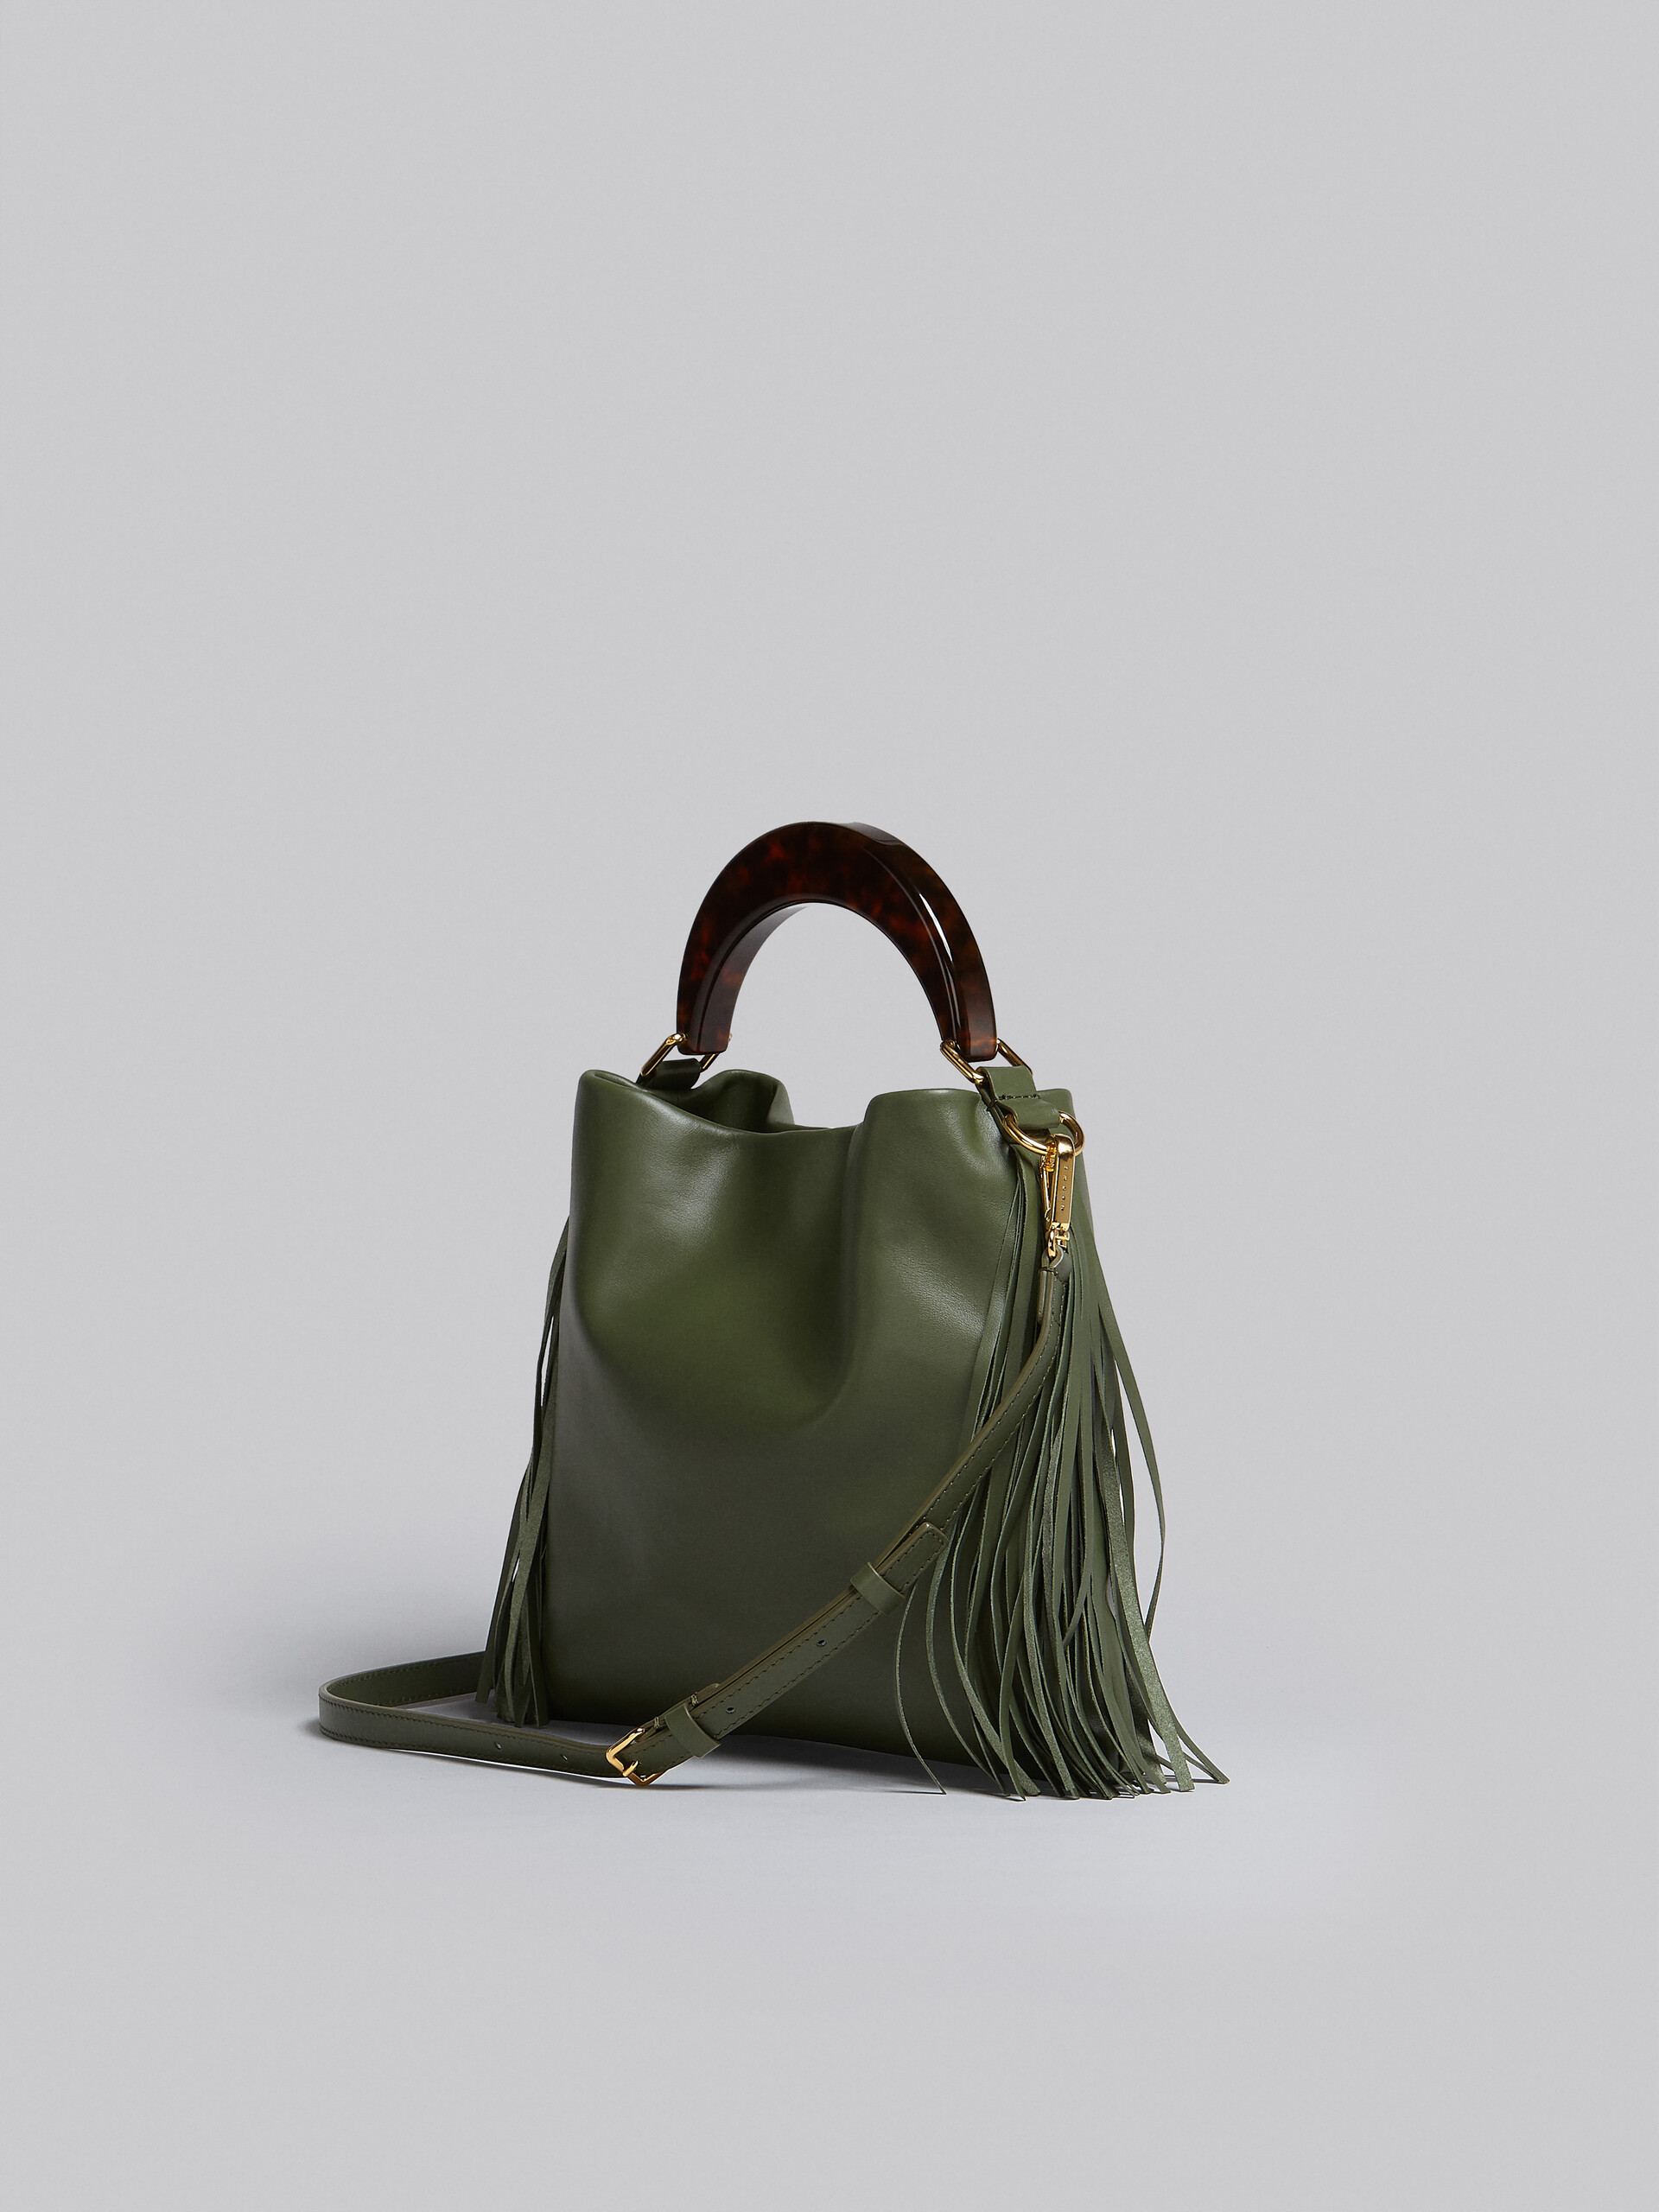 Venice Small Bag in green leather with fringes - Shoulder Bags - Image 2